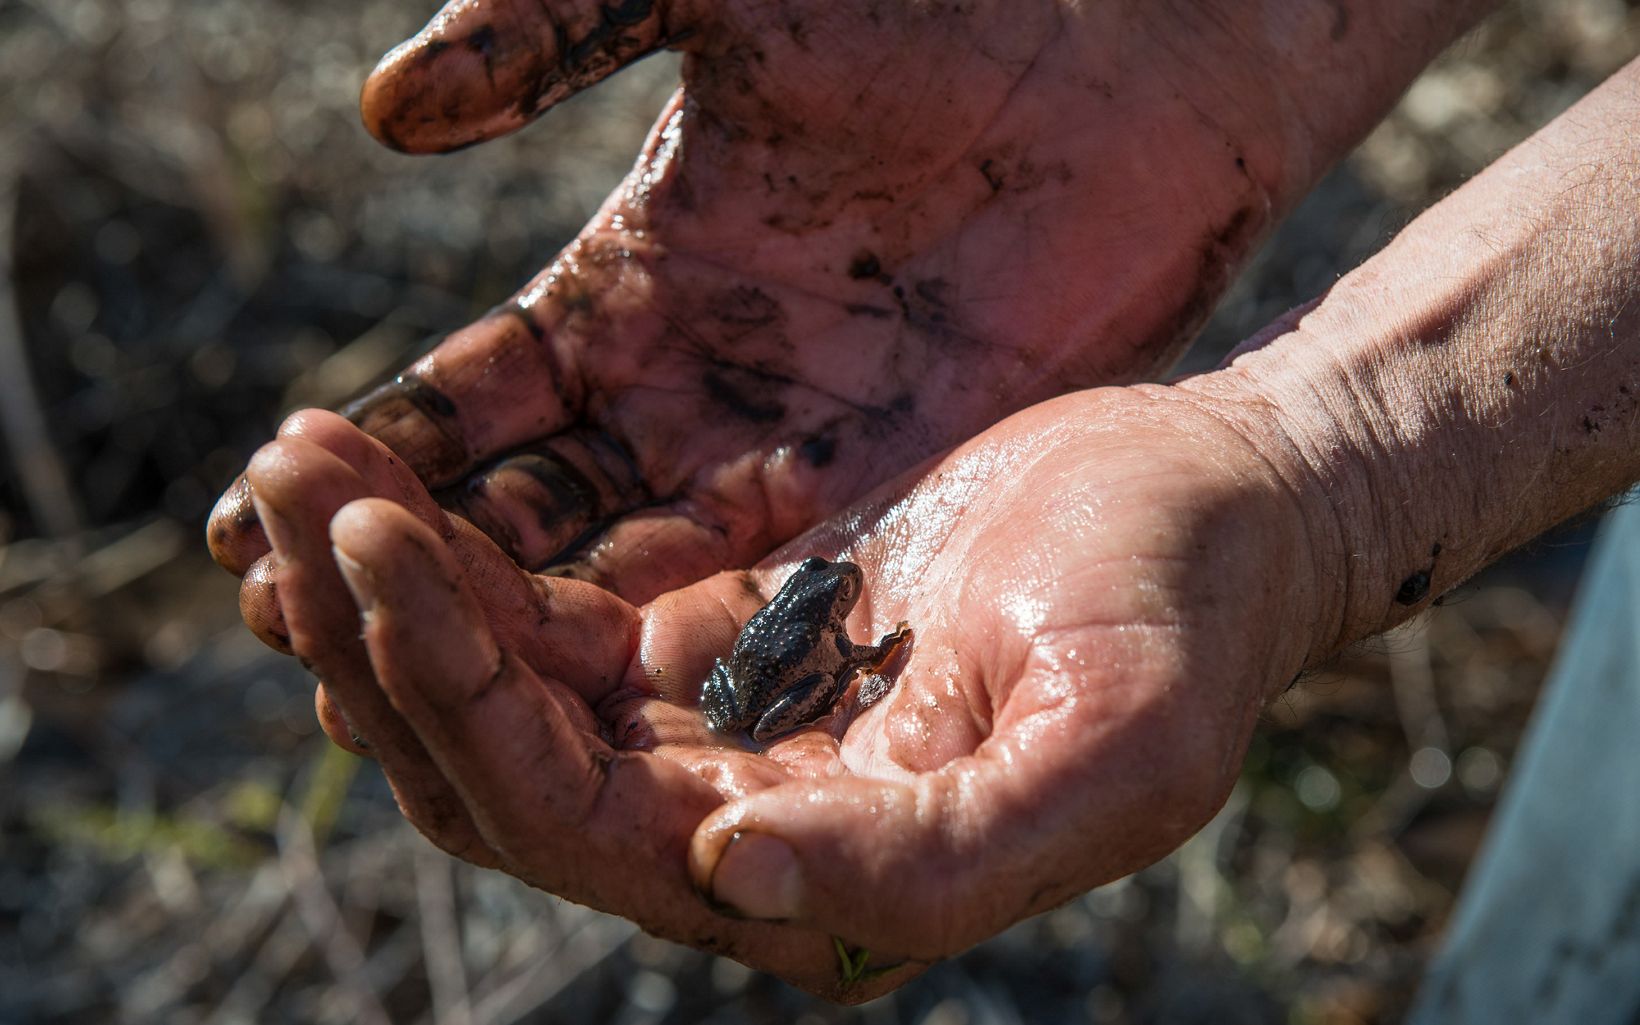 A person holding a small muddy toad in their hand.